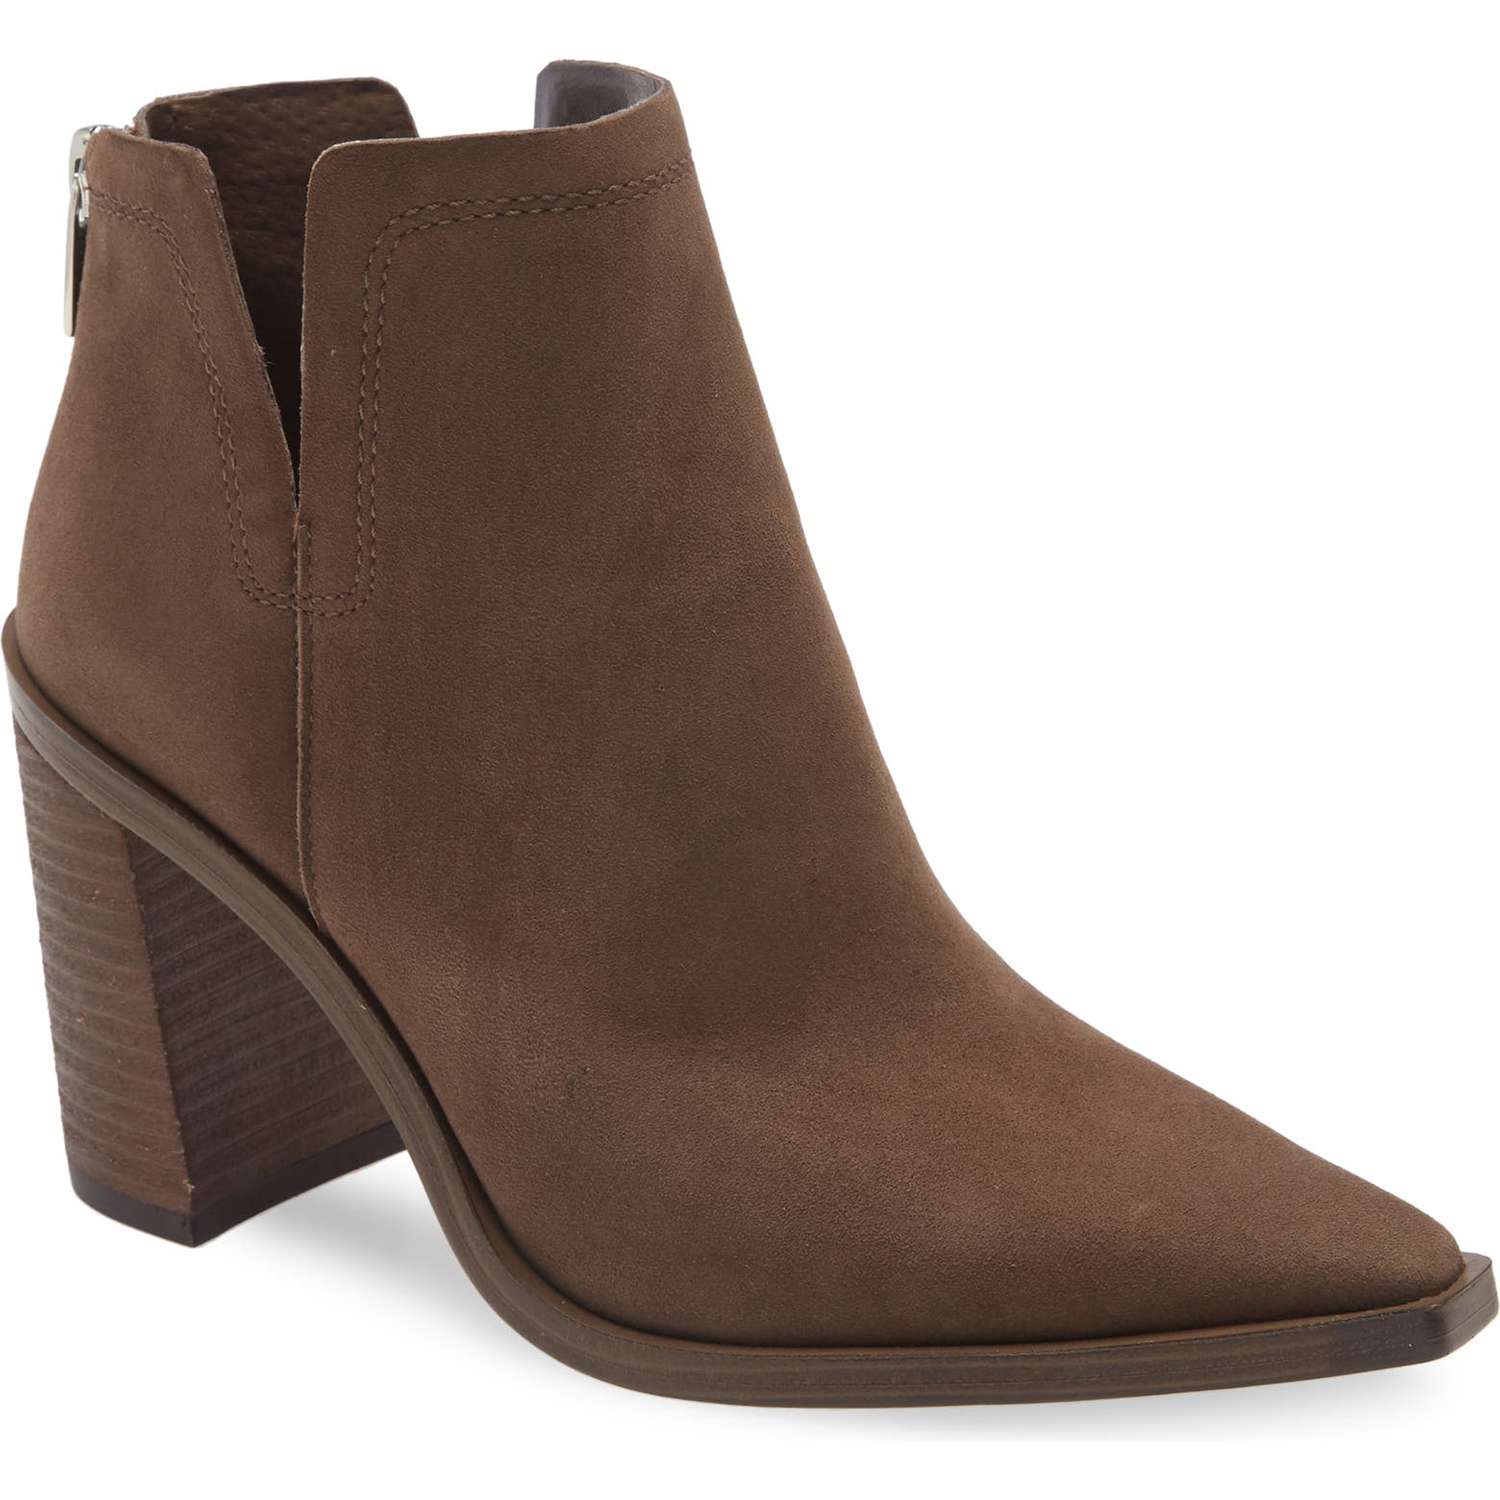 Nordstrom ankle boots on sale